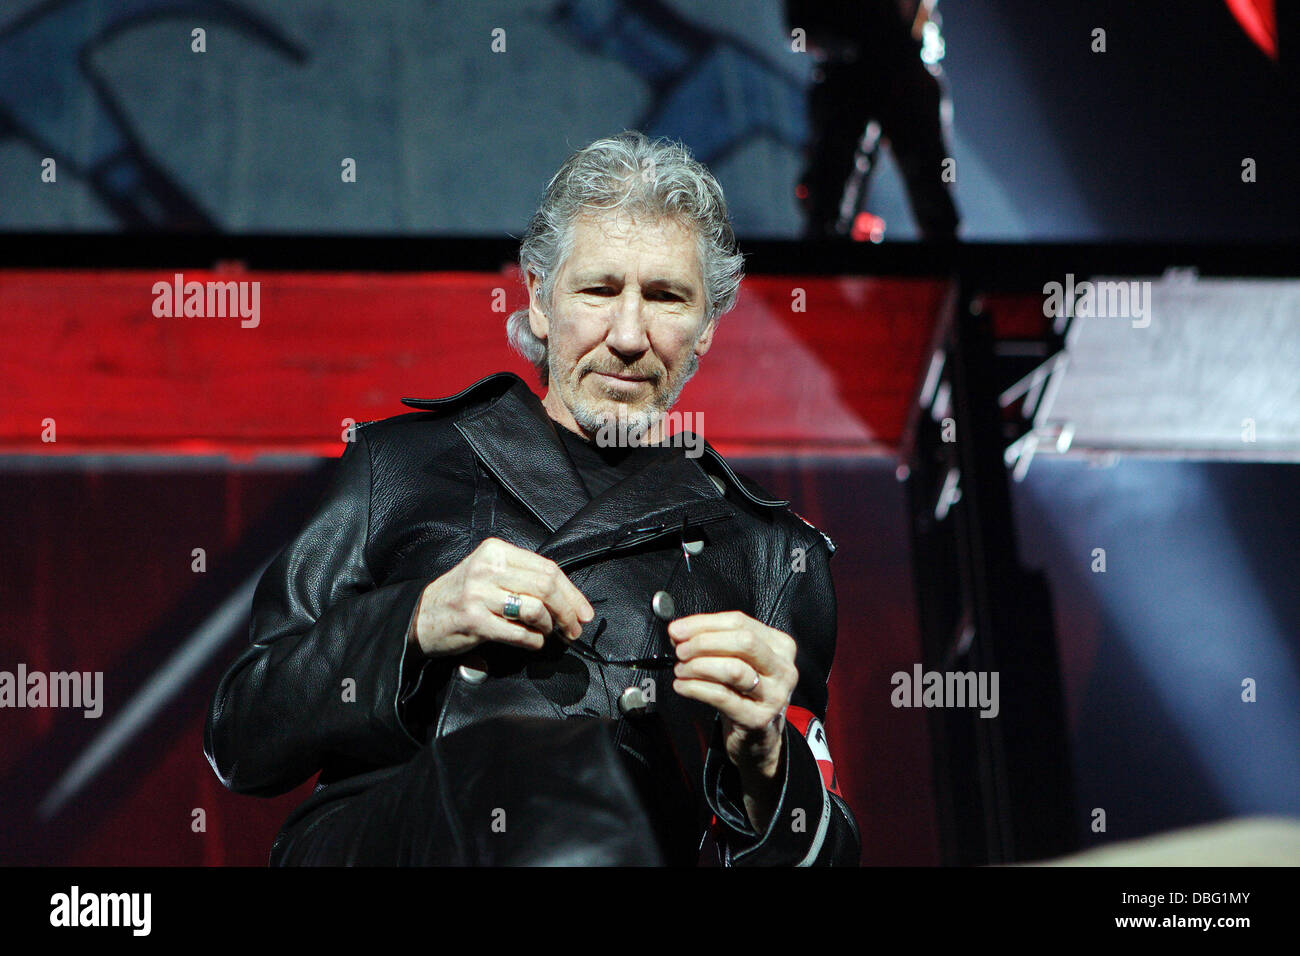 Pink Floyd musician Roger Waters performs at the O2 World Arena Berlin, Germany - 16.06.11 Stock Photo